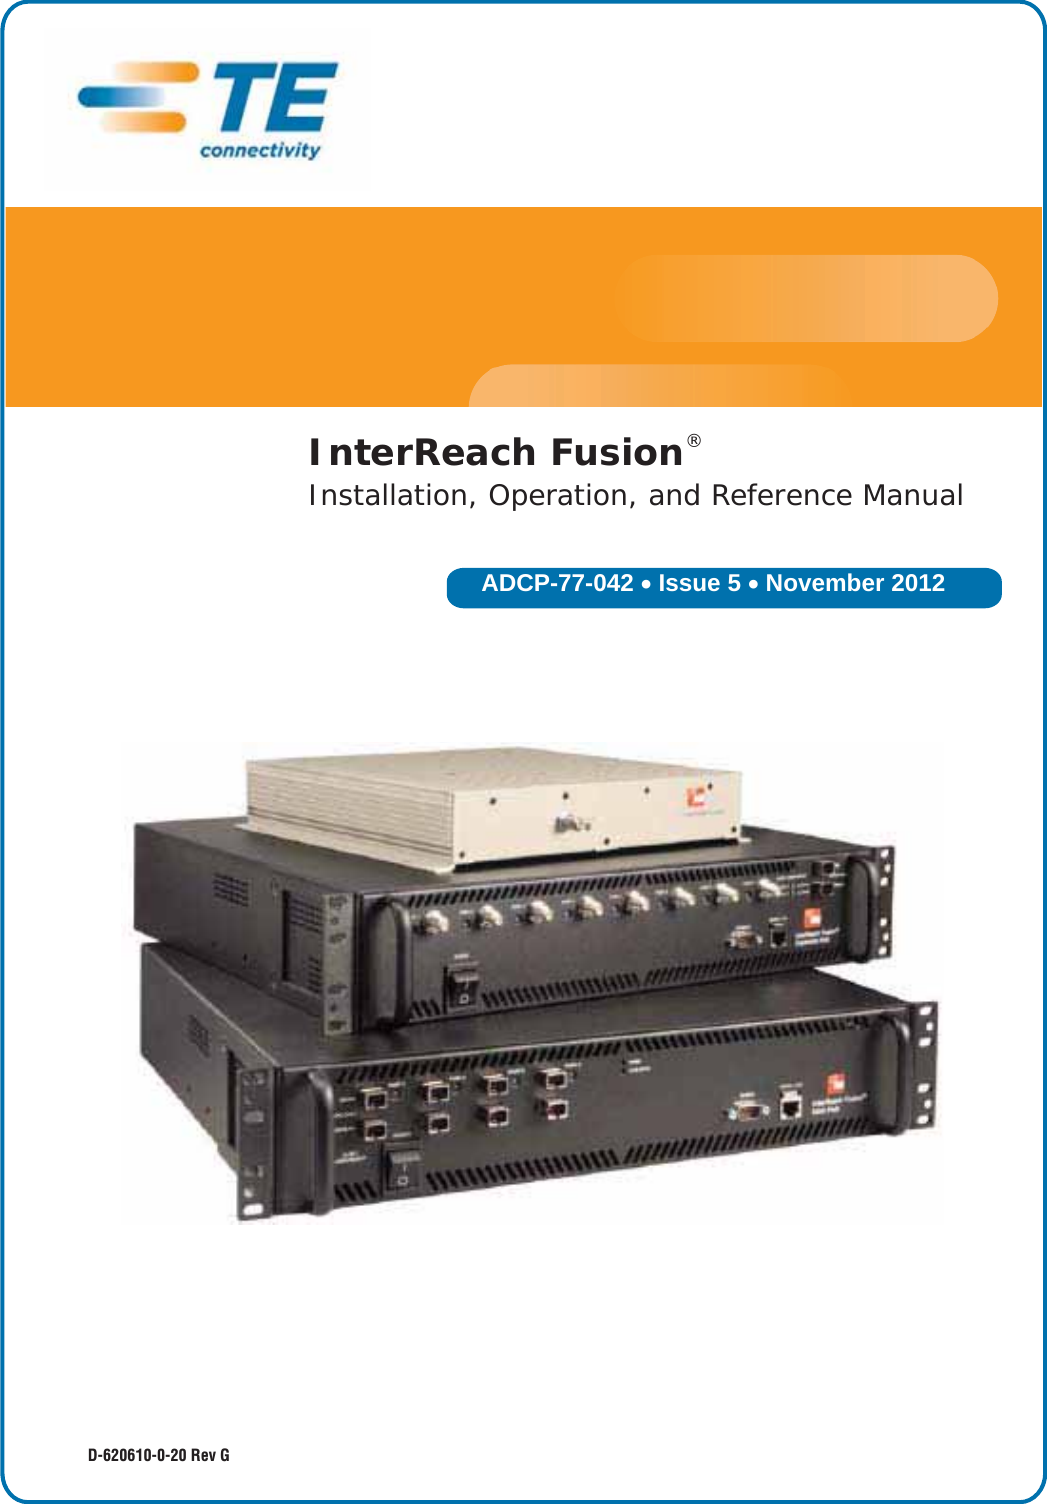 ADCP-77-042 x Issue 5 x November 2012D-620610-0-20 Rev GInterReach Fusion® Installation, Operation, and Reference Manual